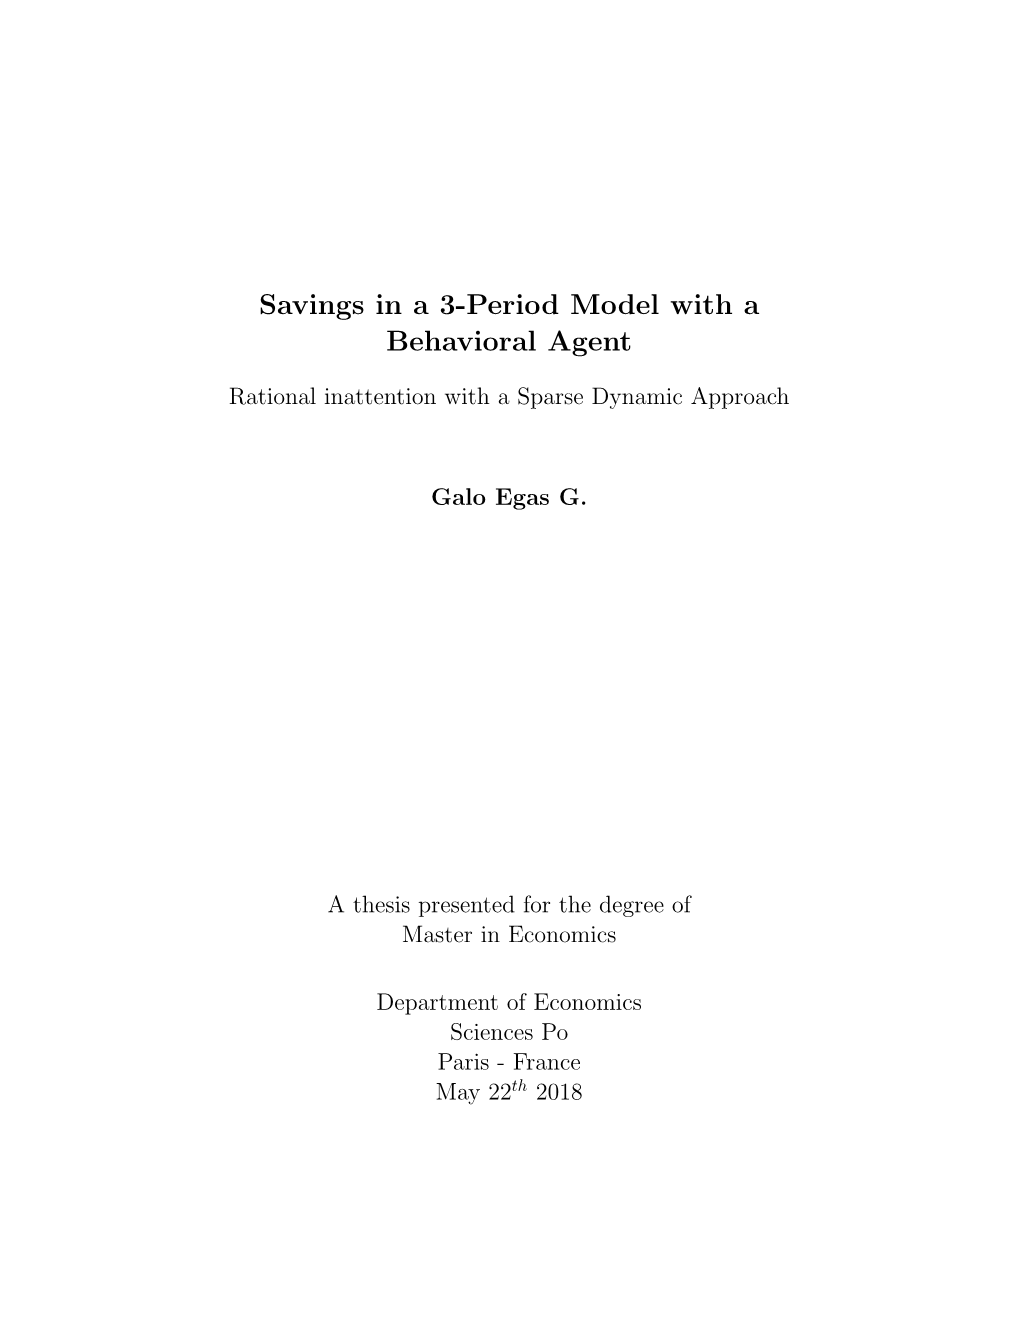 Savings in a 3-Period Model with a Behavioral Agent